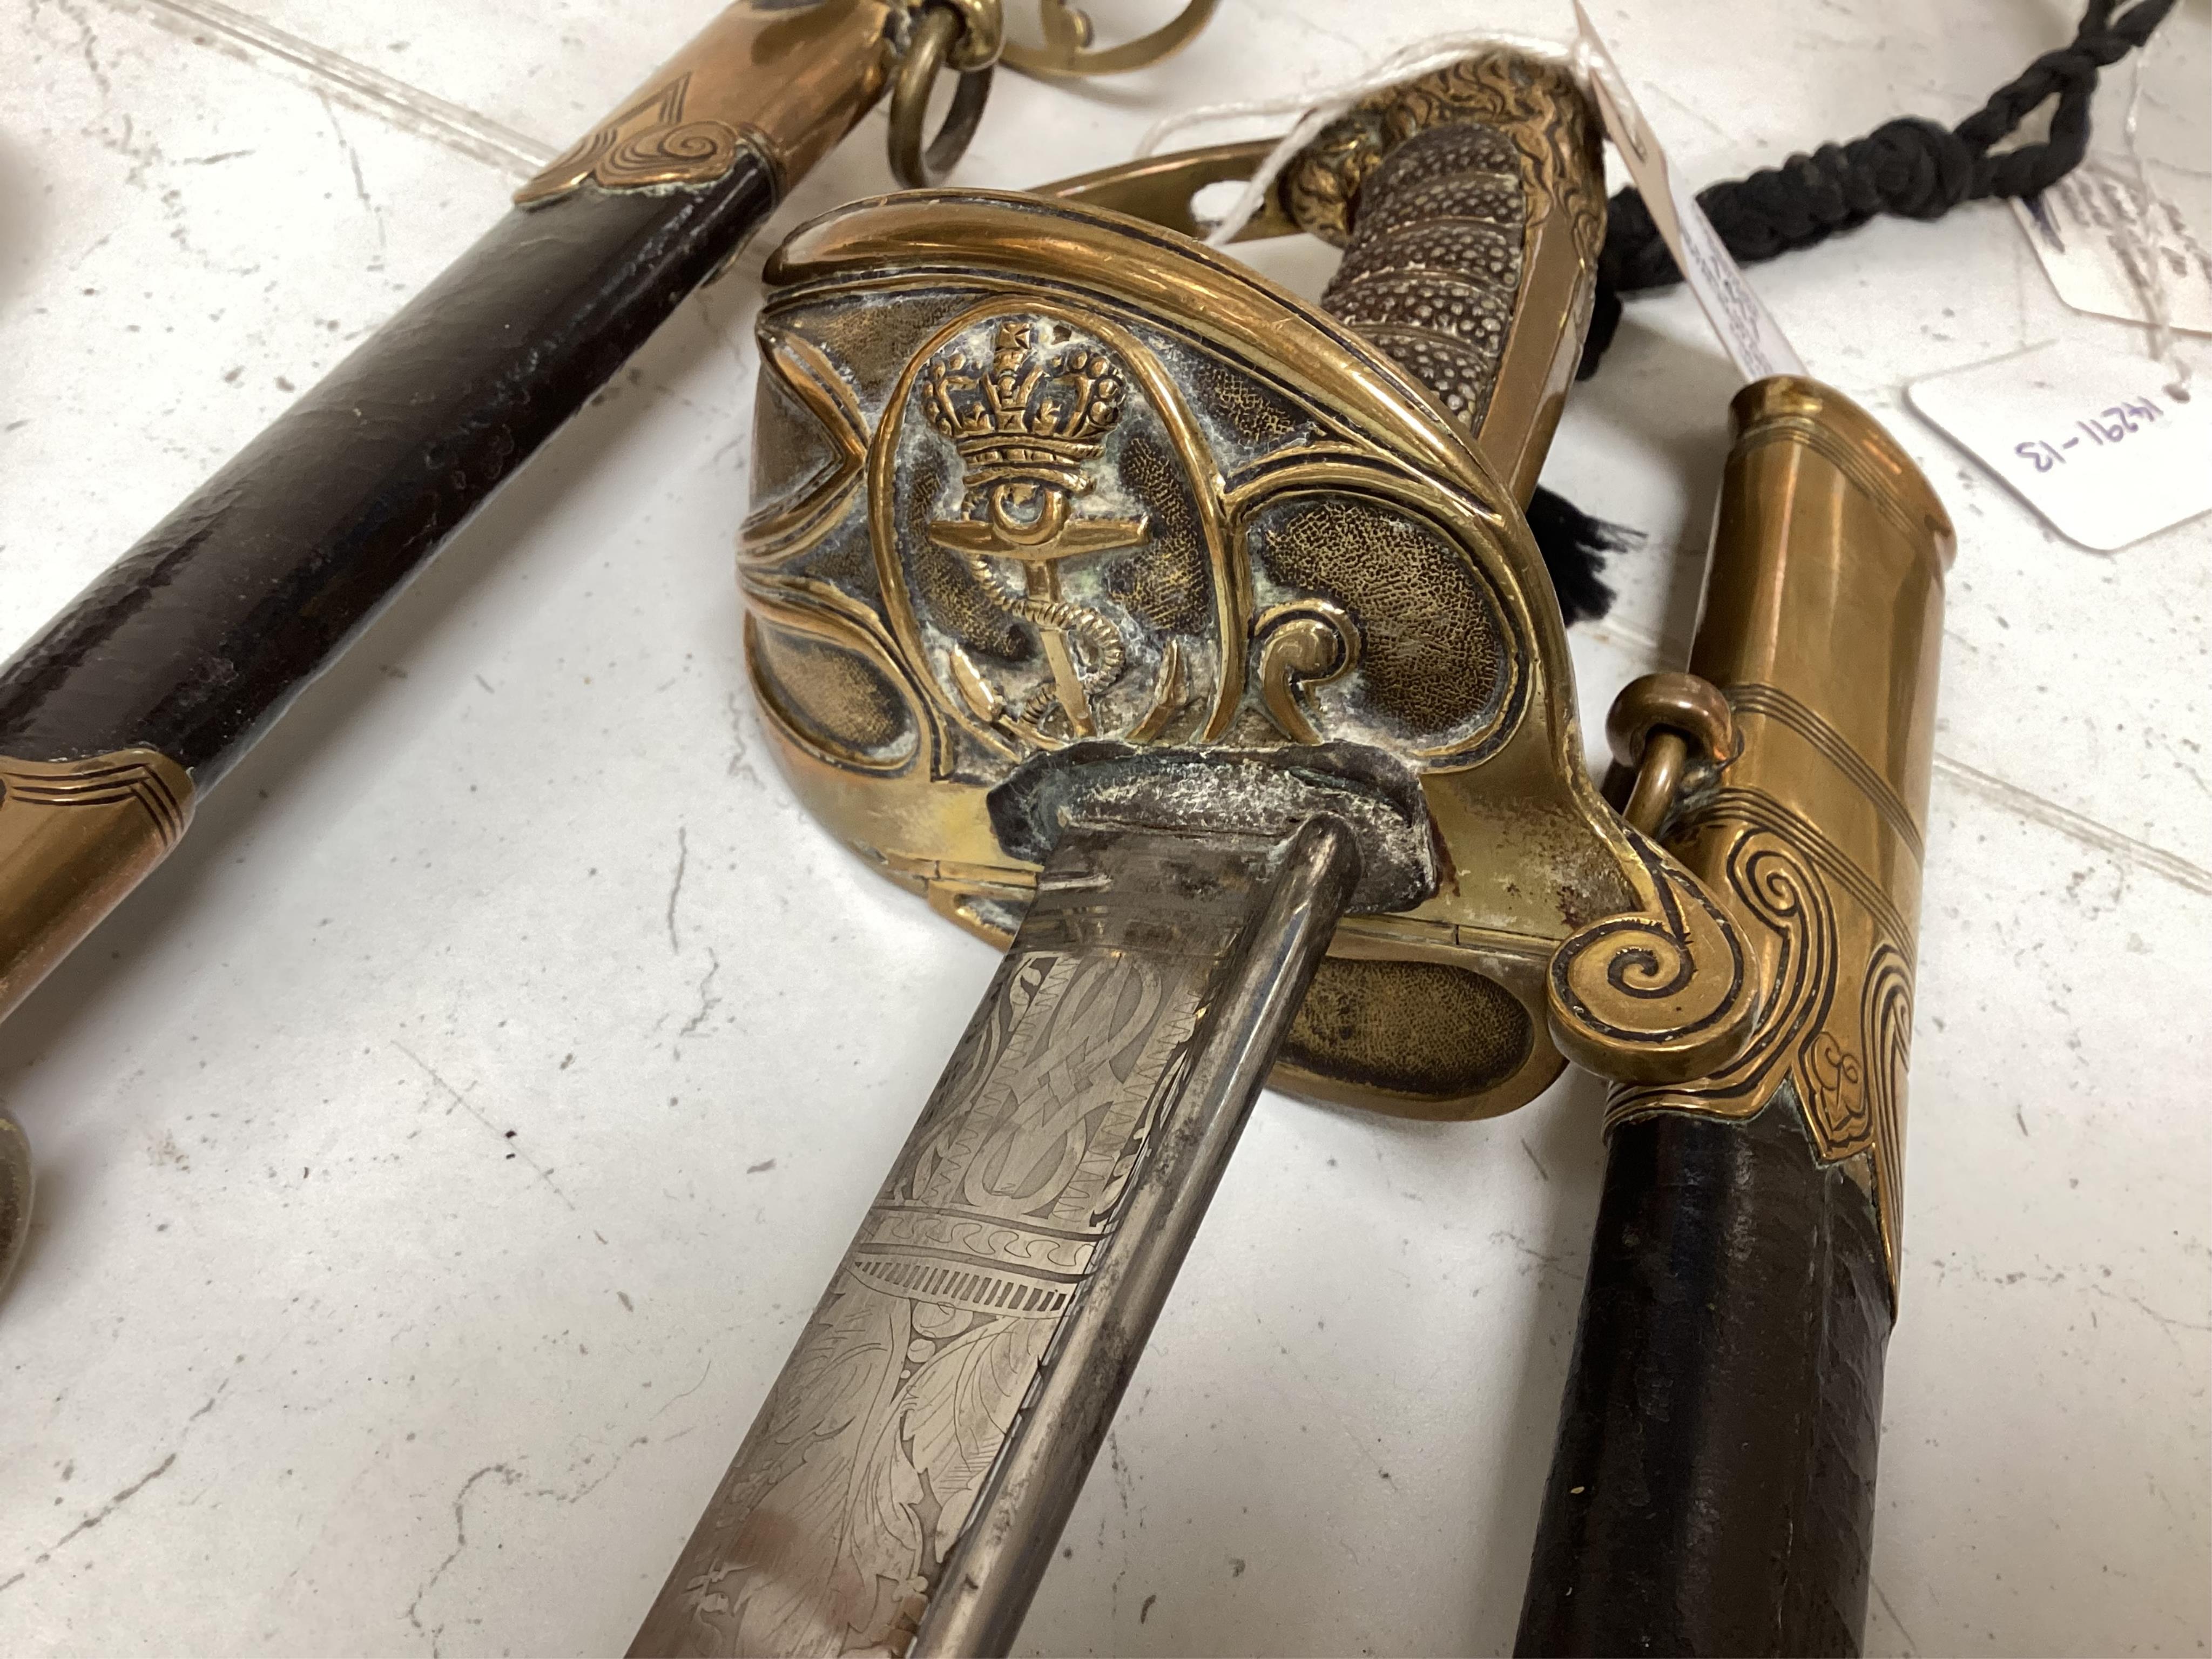 An early 19th century Royal Navy officer's sword with engraved blade, folding knuckle guard, lion’s head pommel and shagreen grip, leather scabbard with brass fittings, blade 73.5cm. Condition - fair, some wear overall.